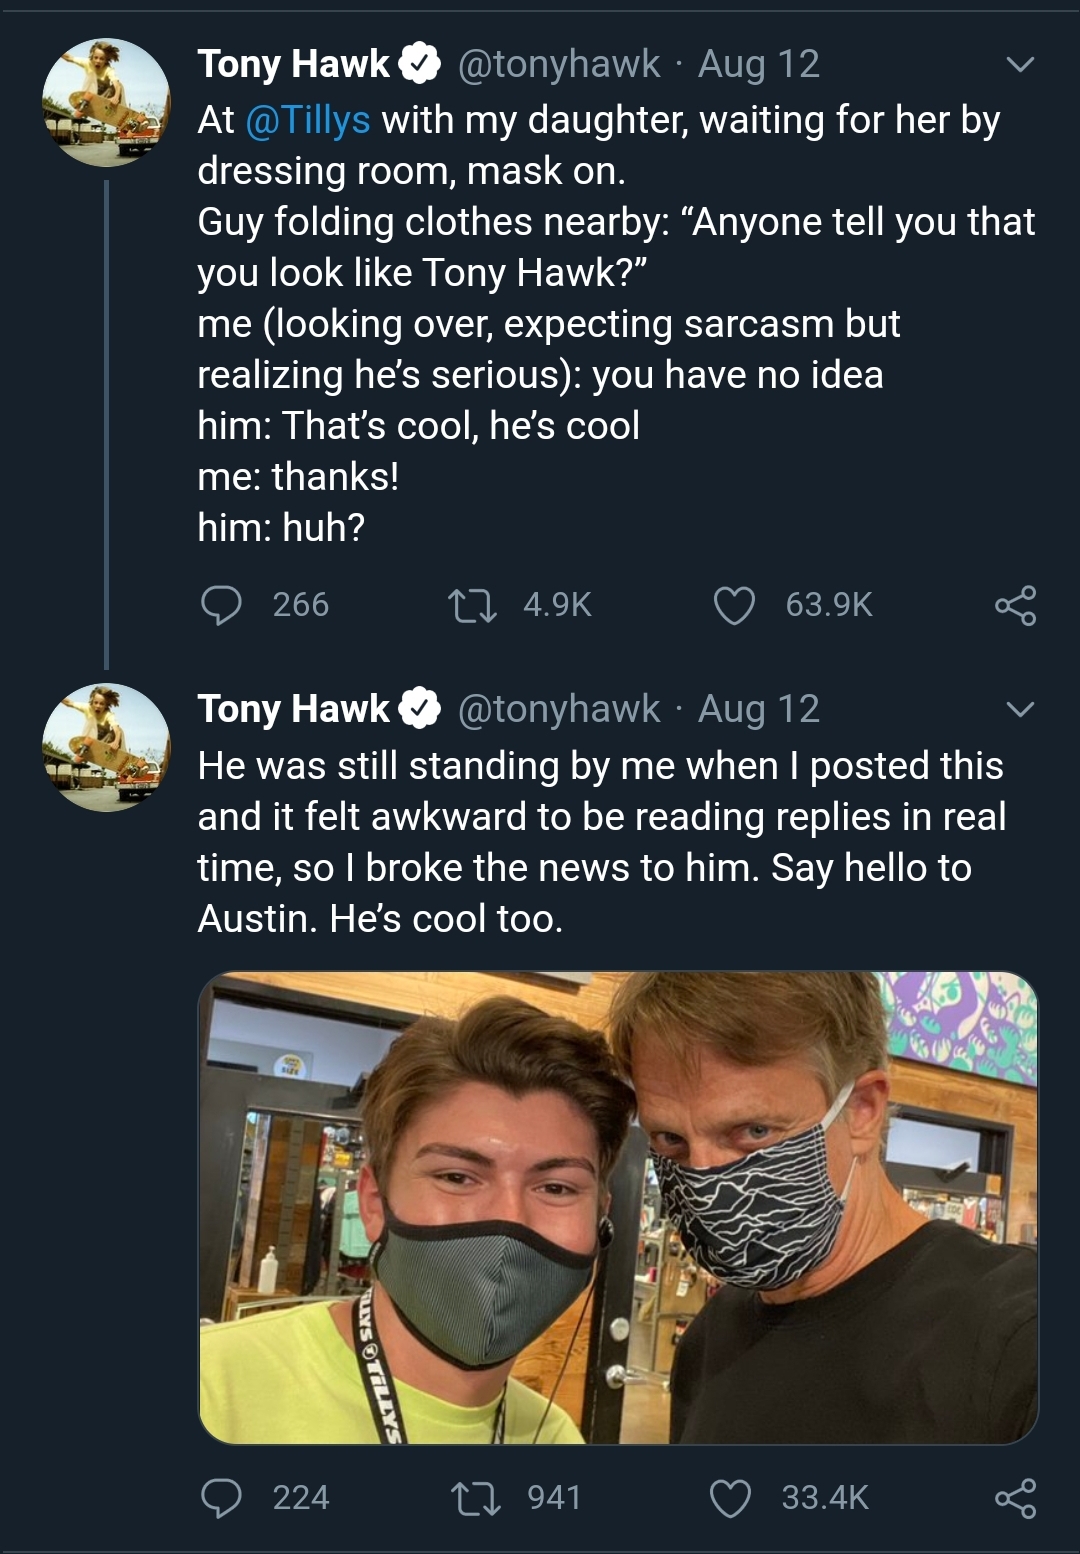 wholesome pics - Tony hawk - At Tillys with my daughter, waiting for her by dressing room, mask on. Guy folding clothes nearby